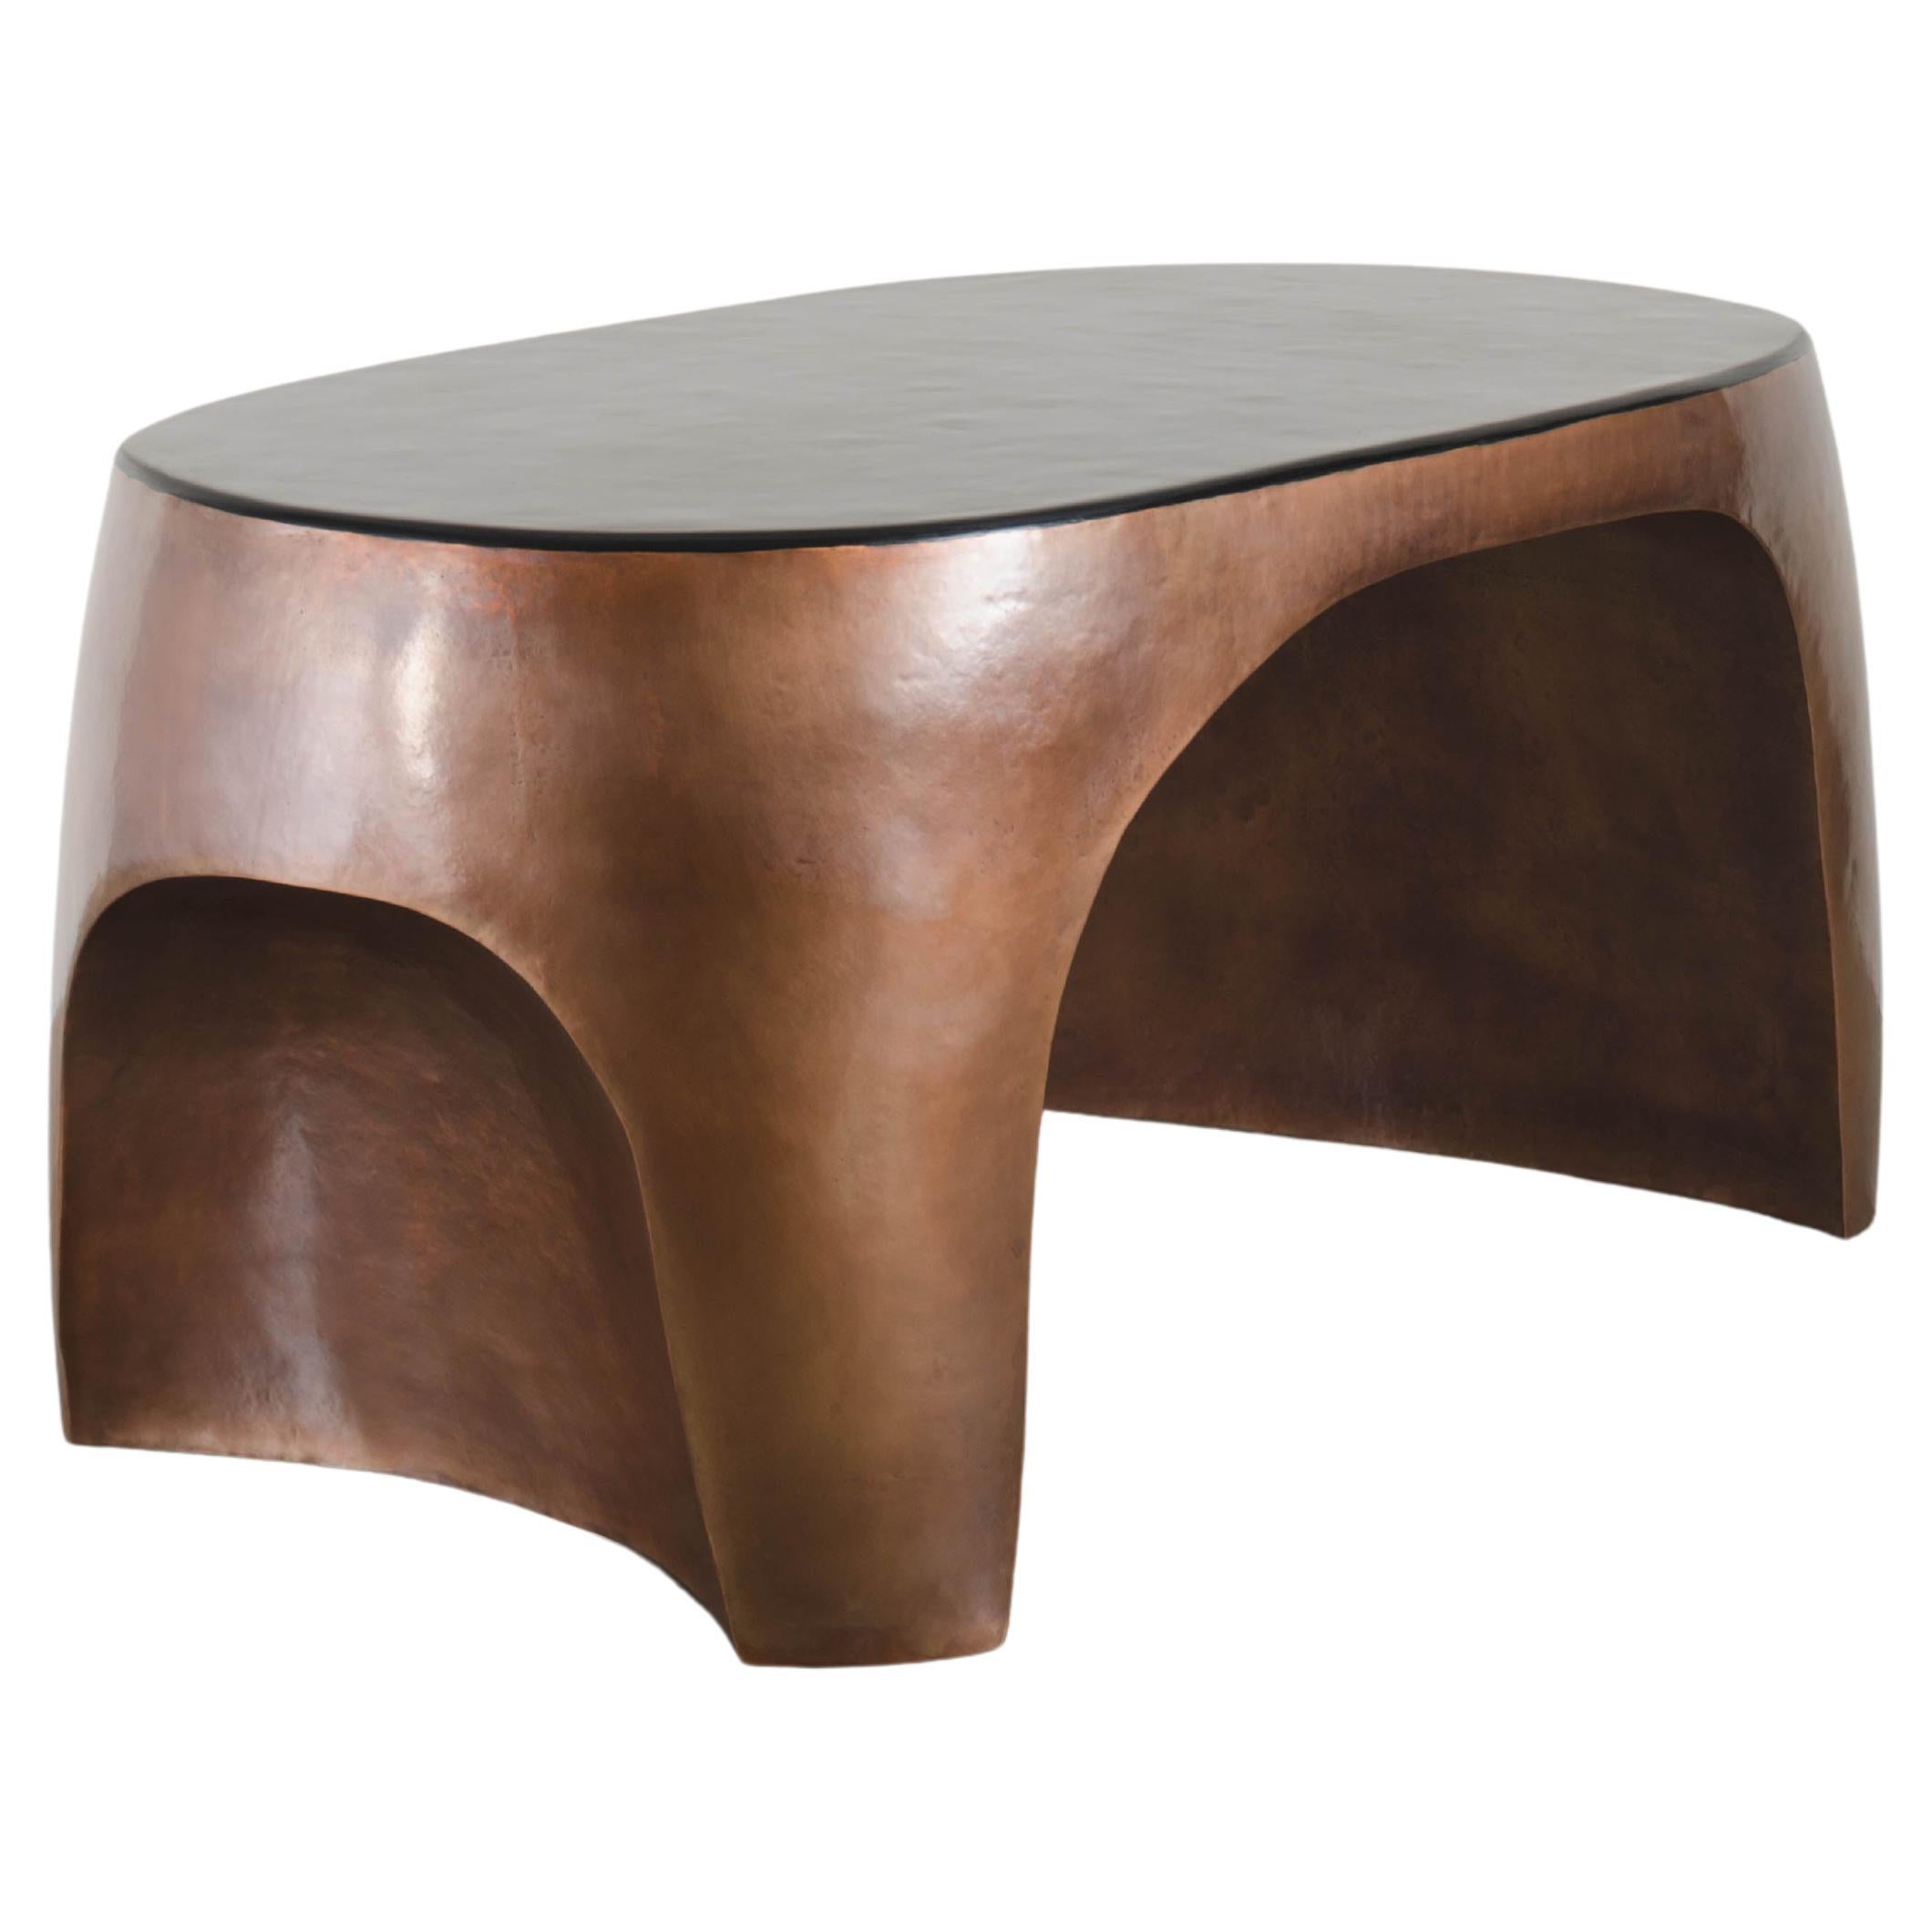 Robert Kuo Repousse Curve Desk Table in Antique Copper and Black Lacquer For Sale